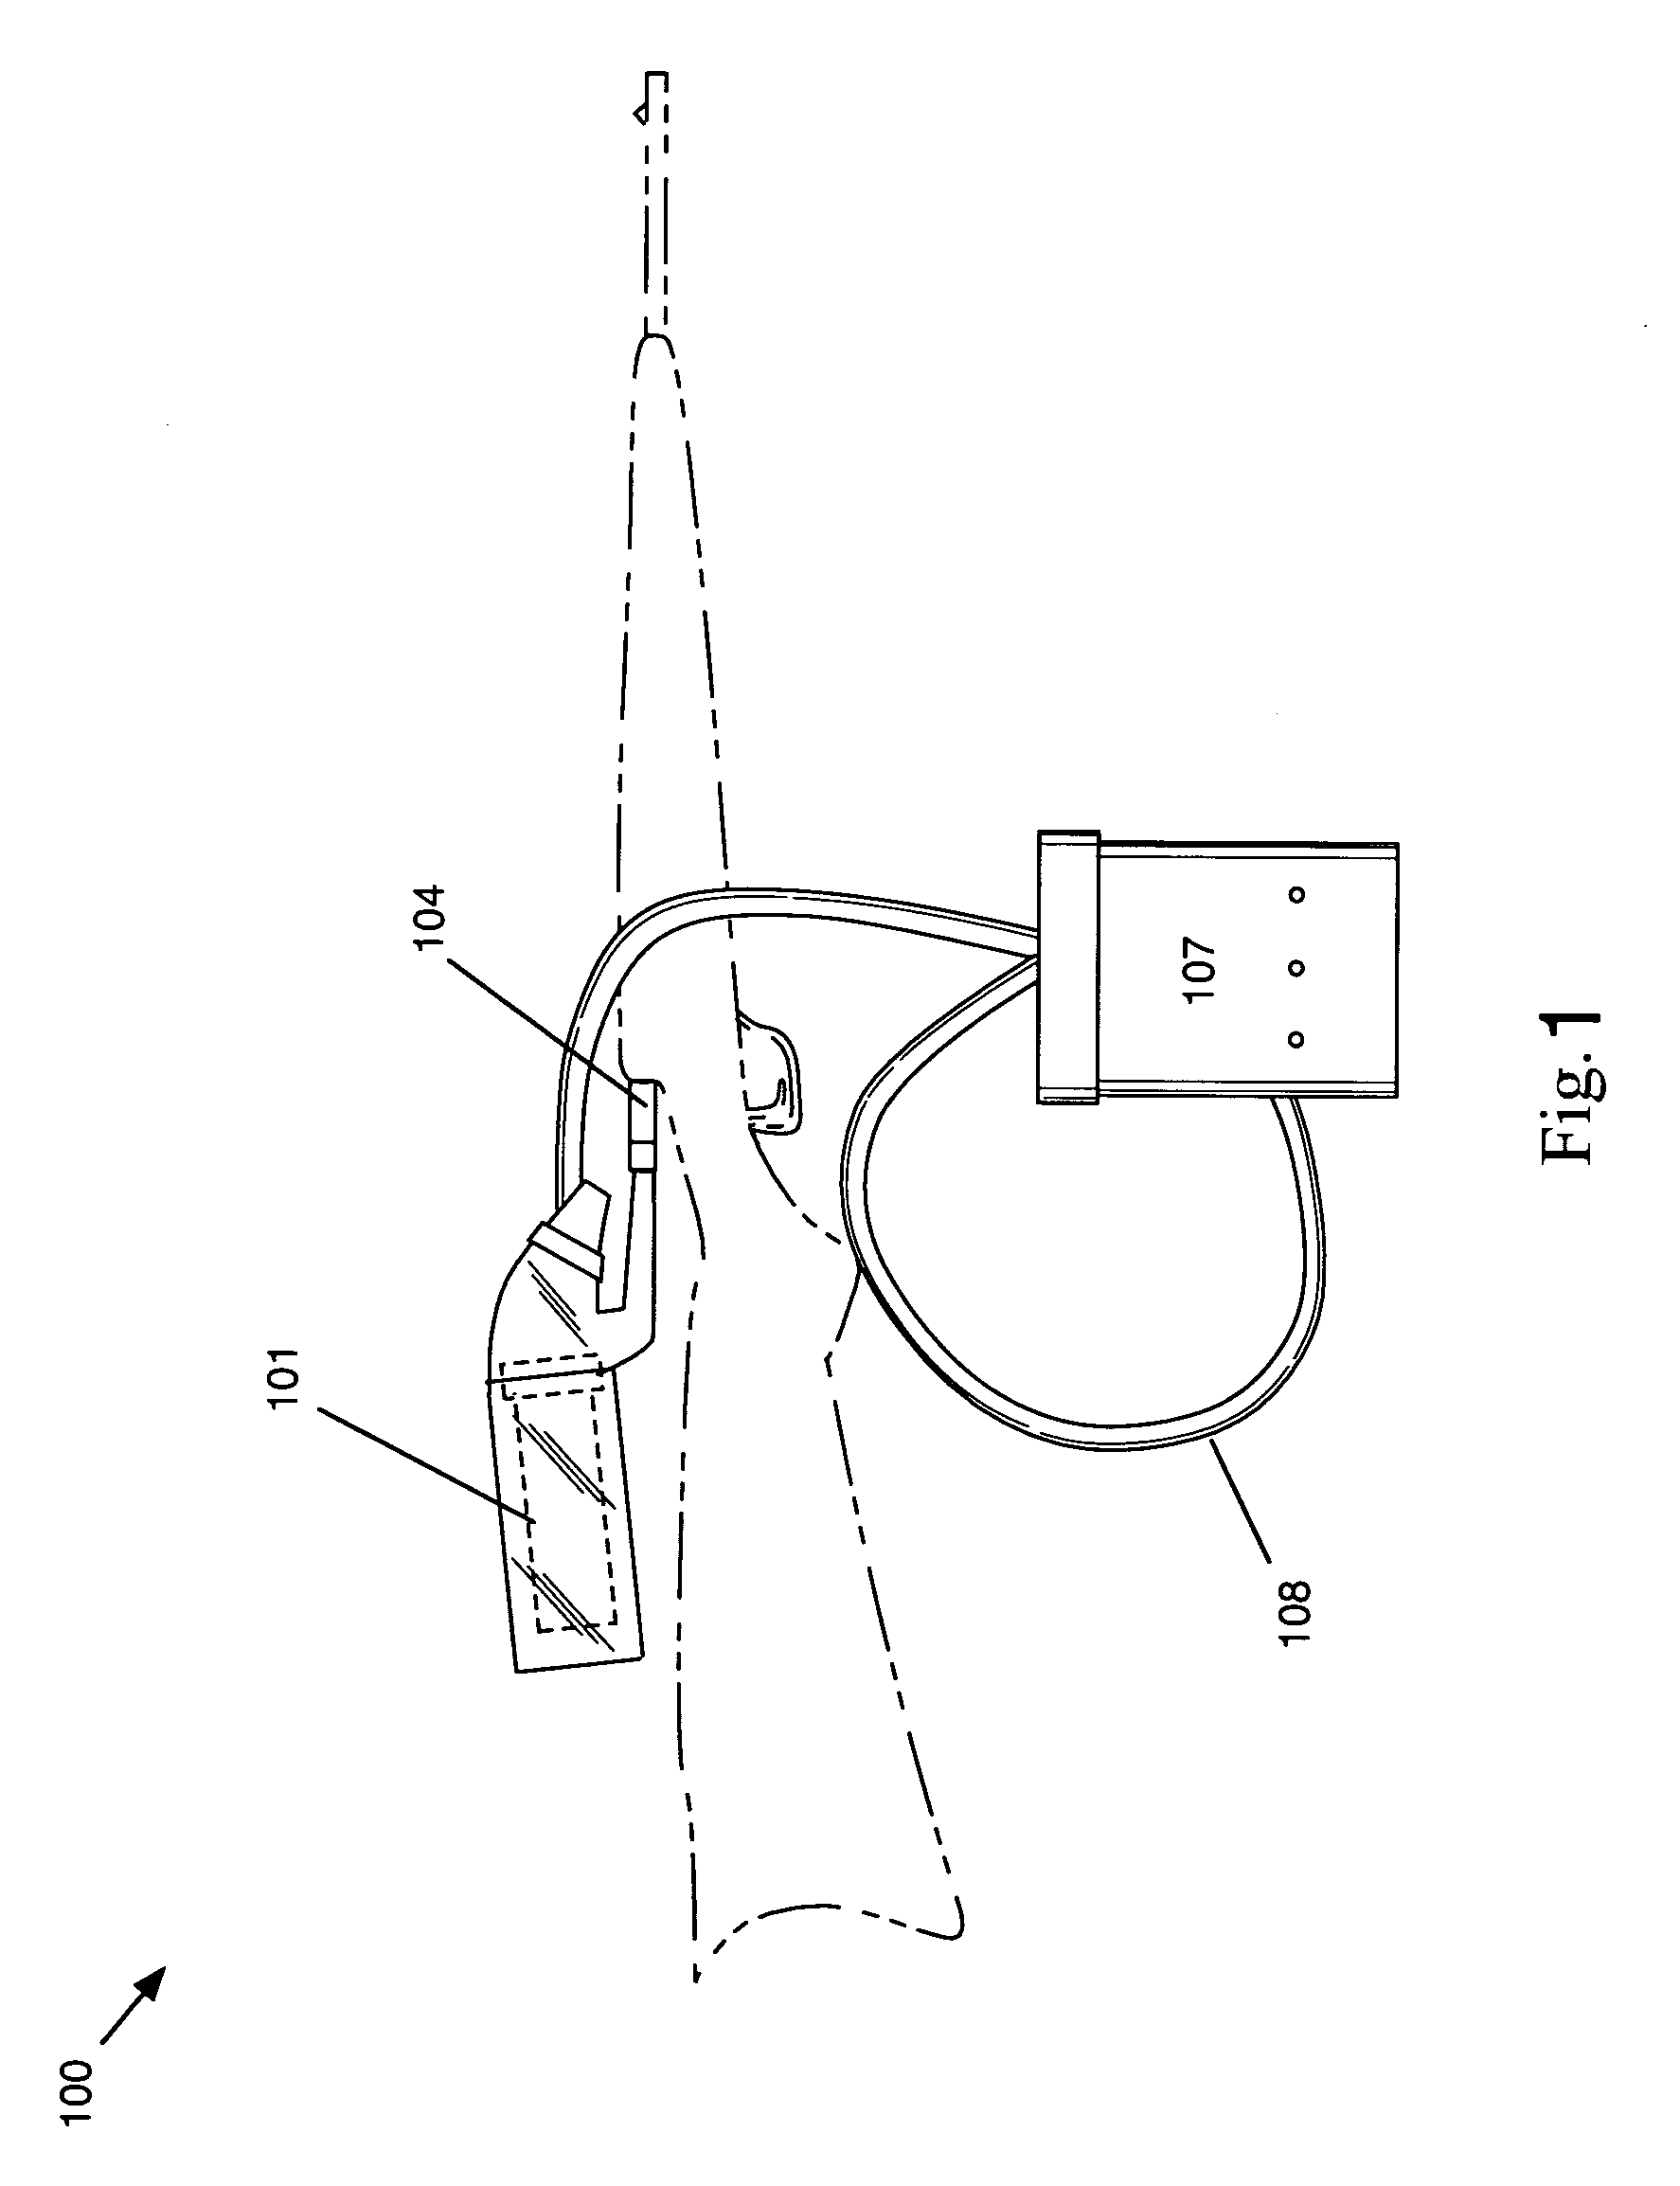 System and method for cooling the barrel of a firearm